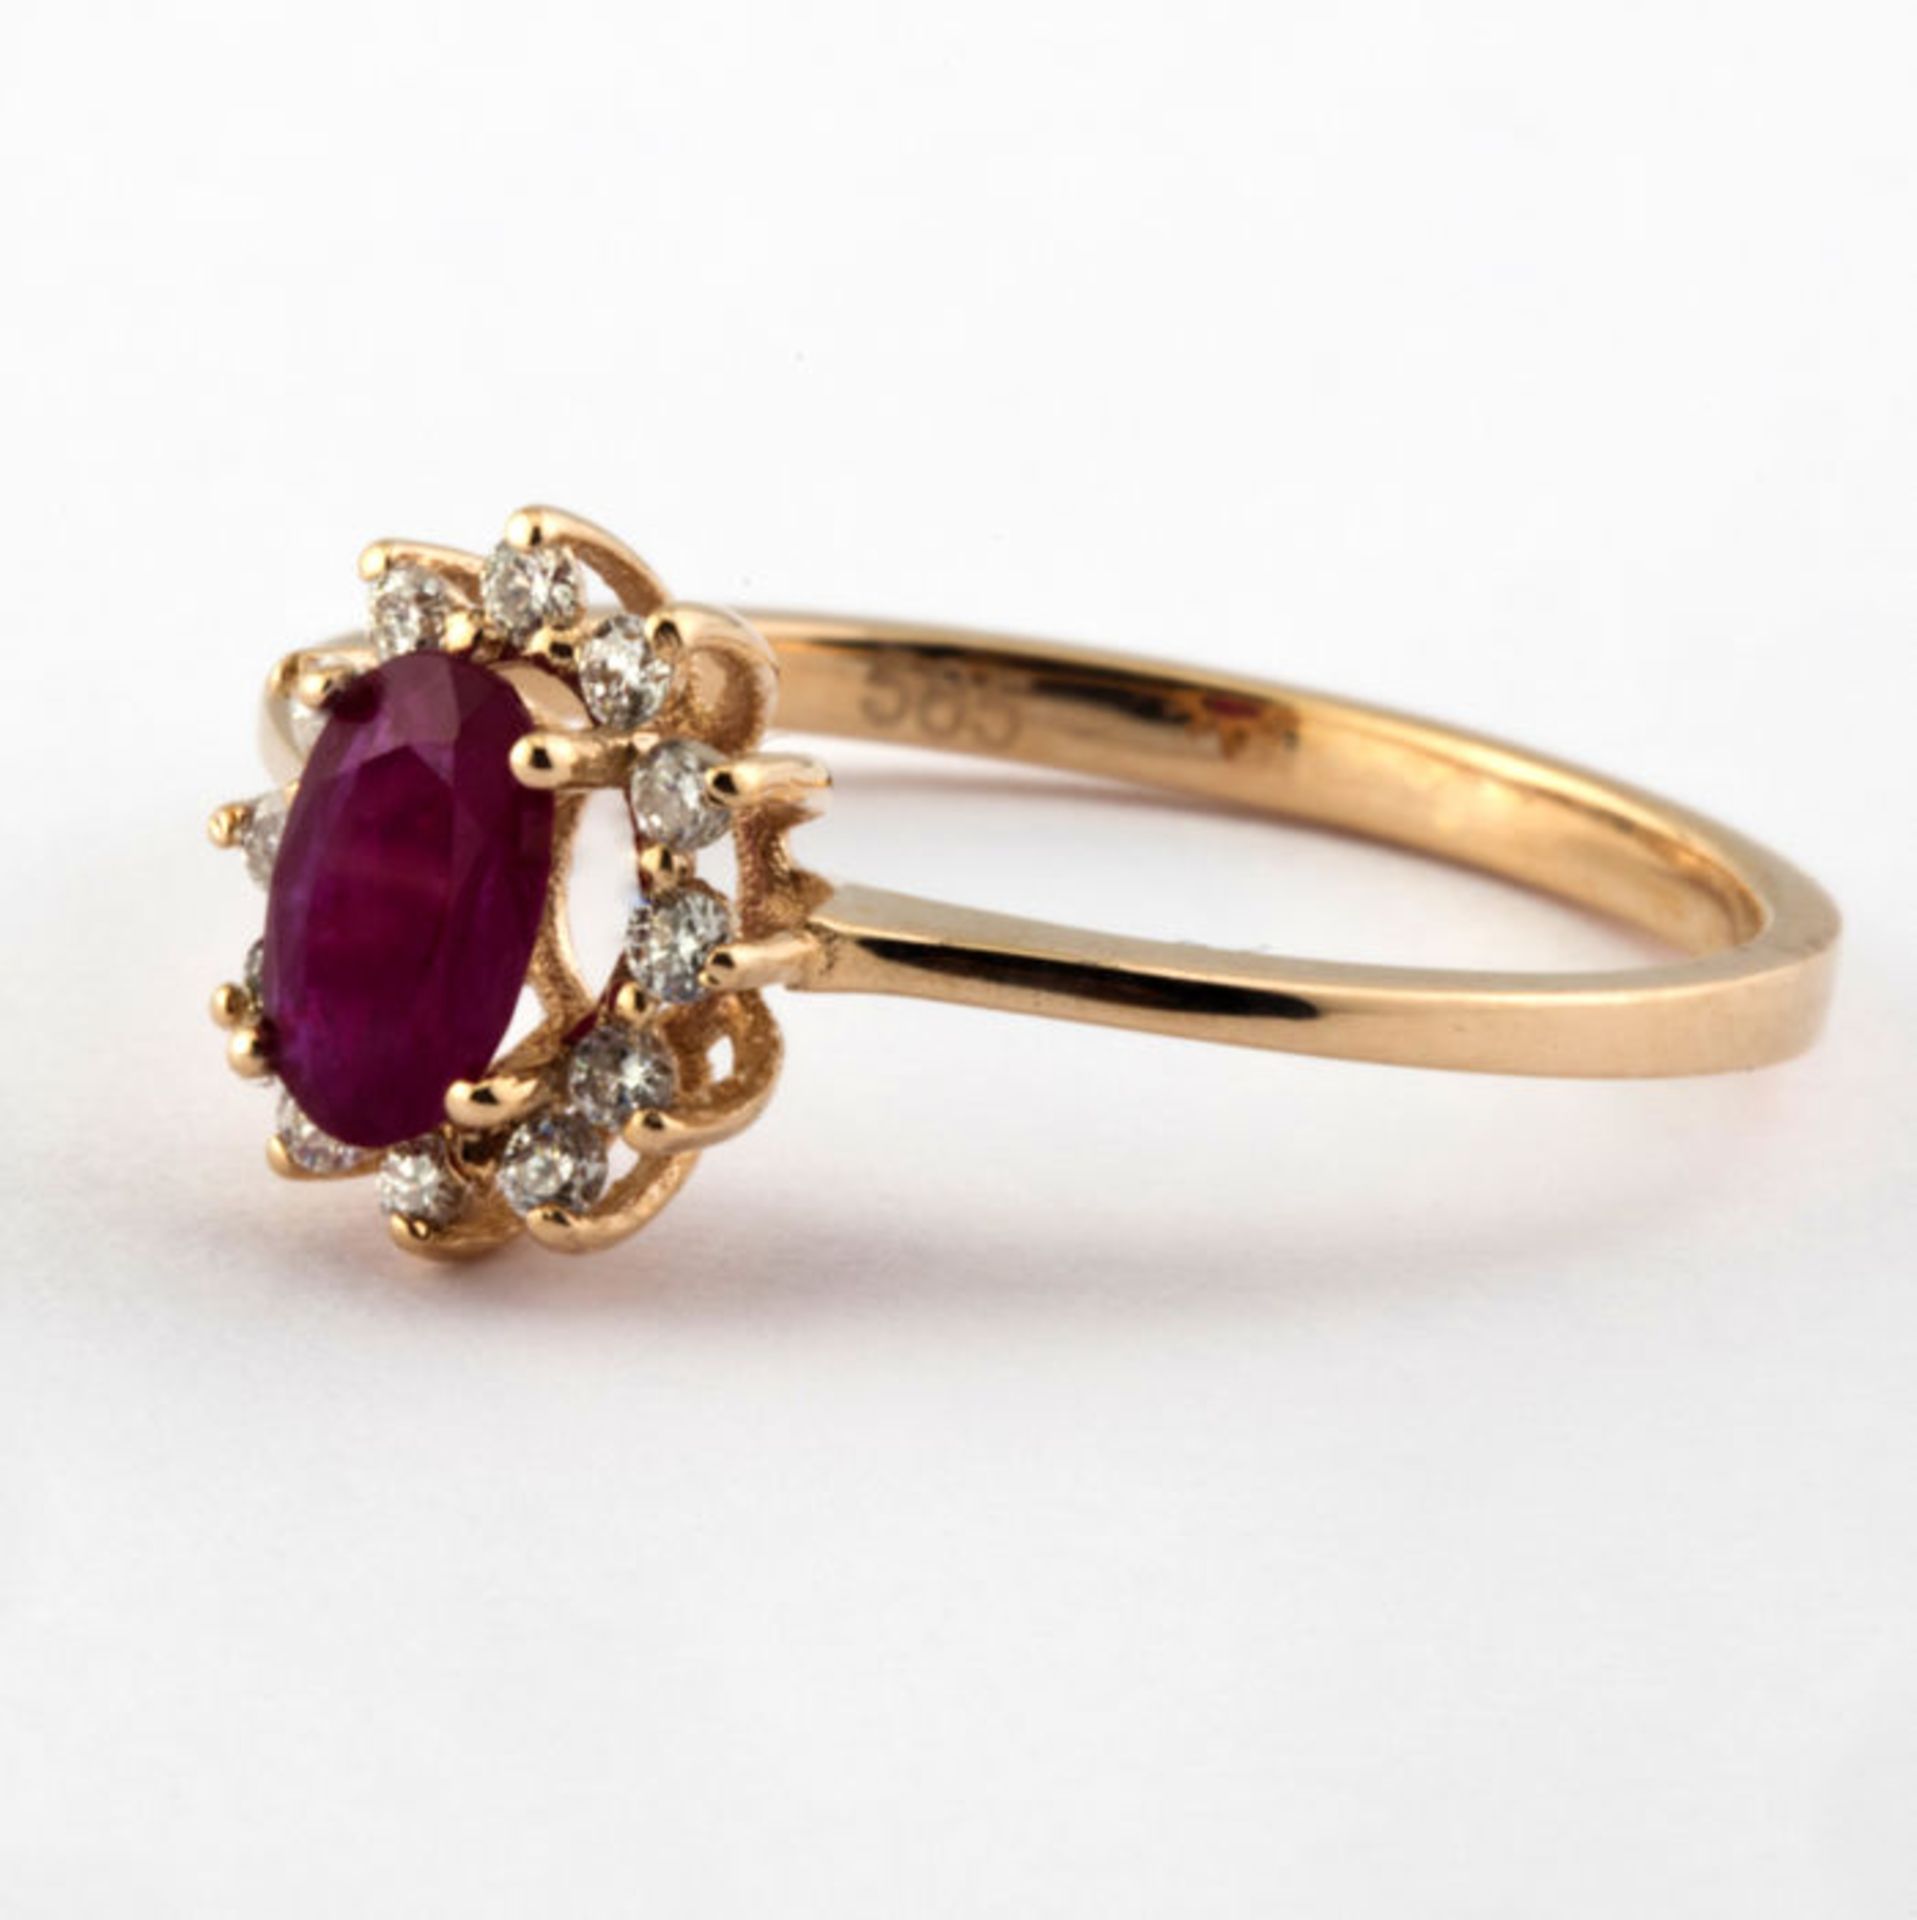 14K Pink Gold Cluster Ring Total:0,65ct,12 Pcs Brilliant Cut Round Diamond and 1 Natural Ruby - Image 6 of 6